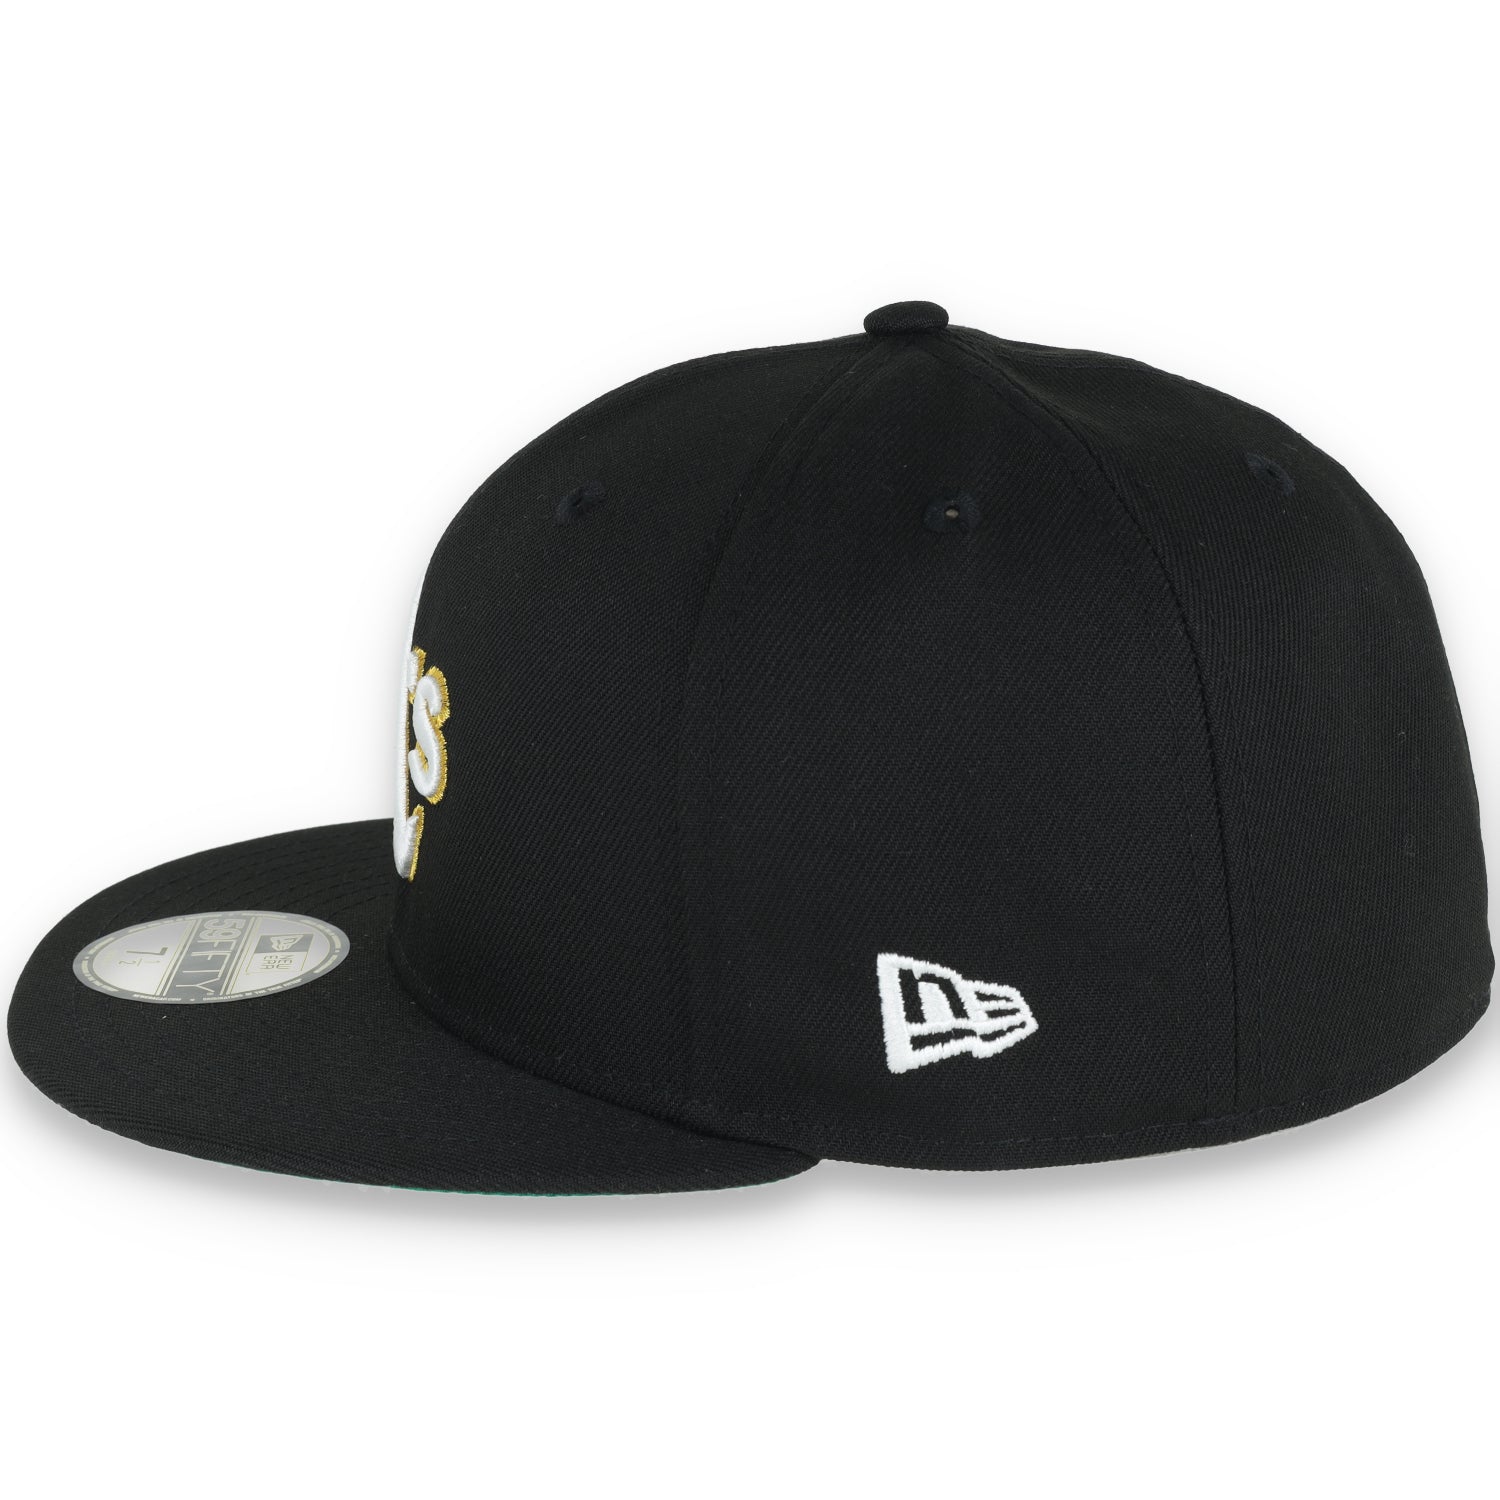 New Era Oakland Athletics 50th Anniversary Metallic Logo Side Patch 59fifty Fitted Hat-Black